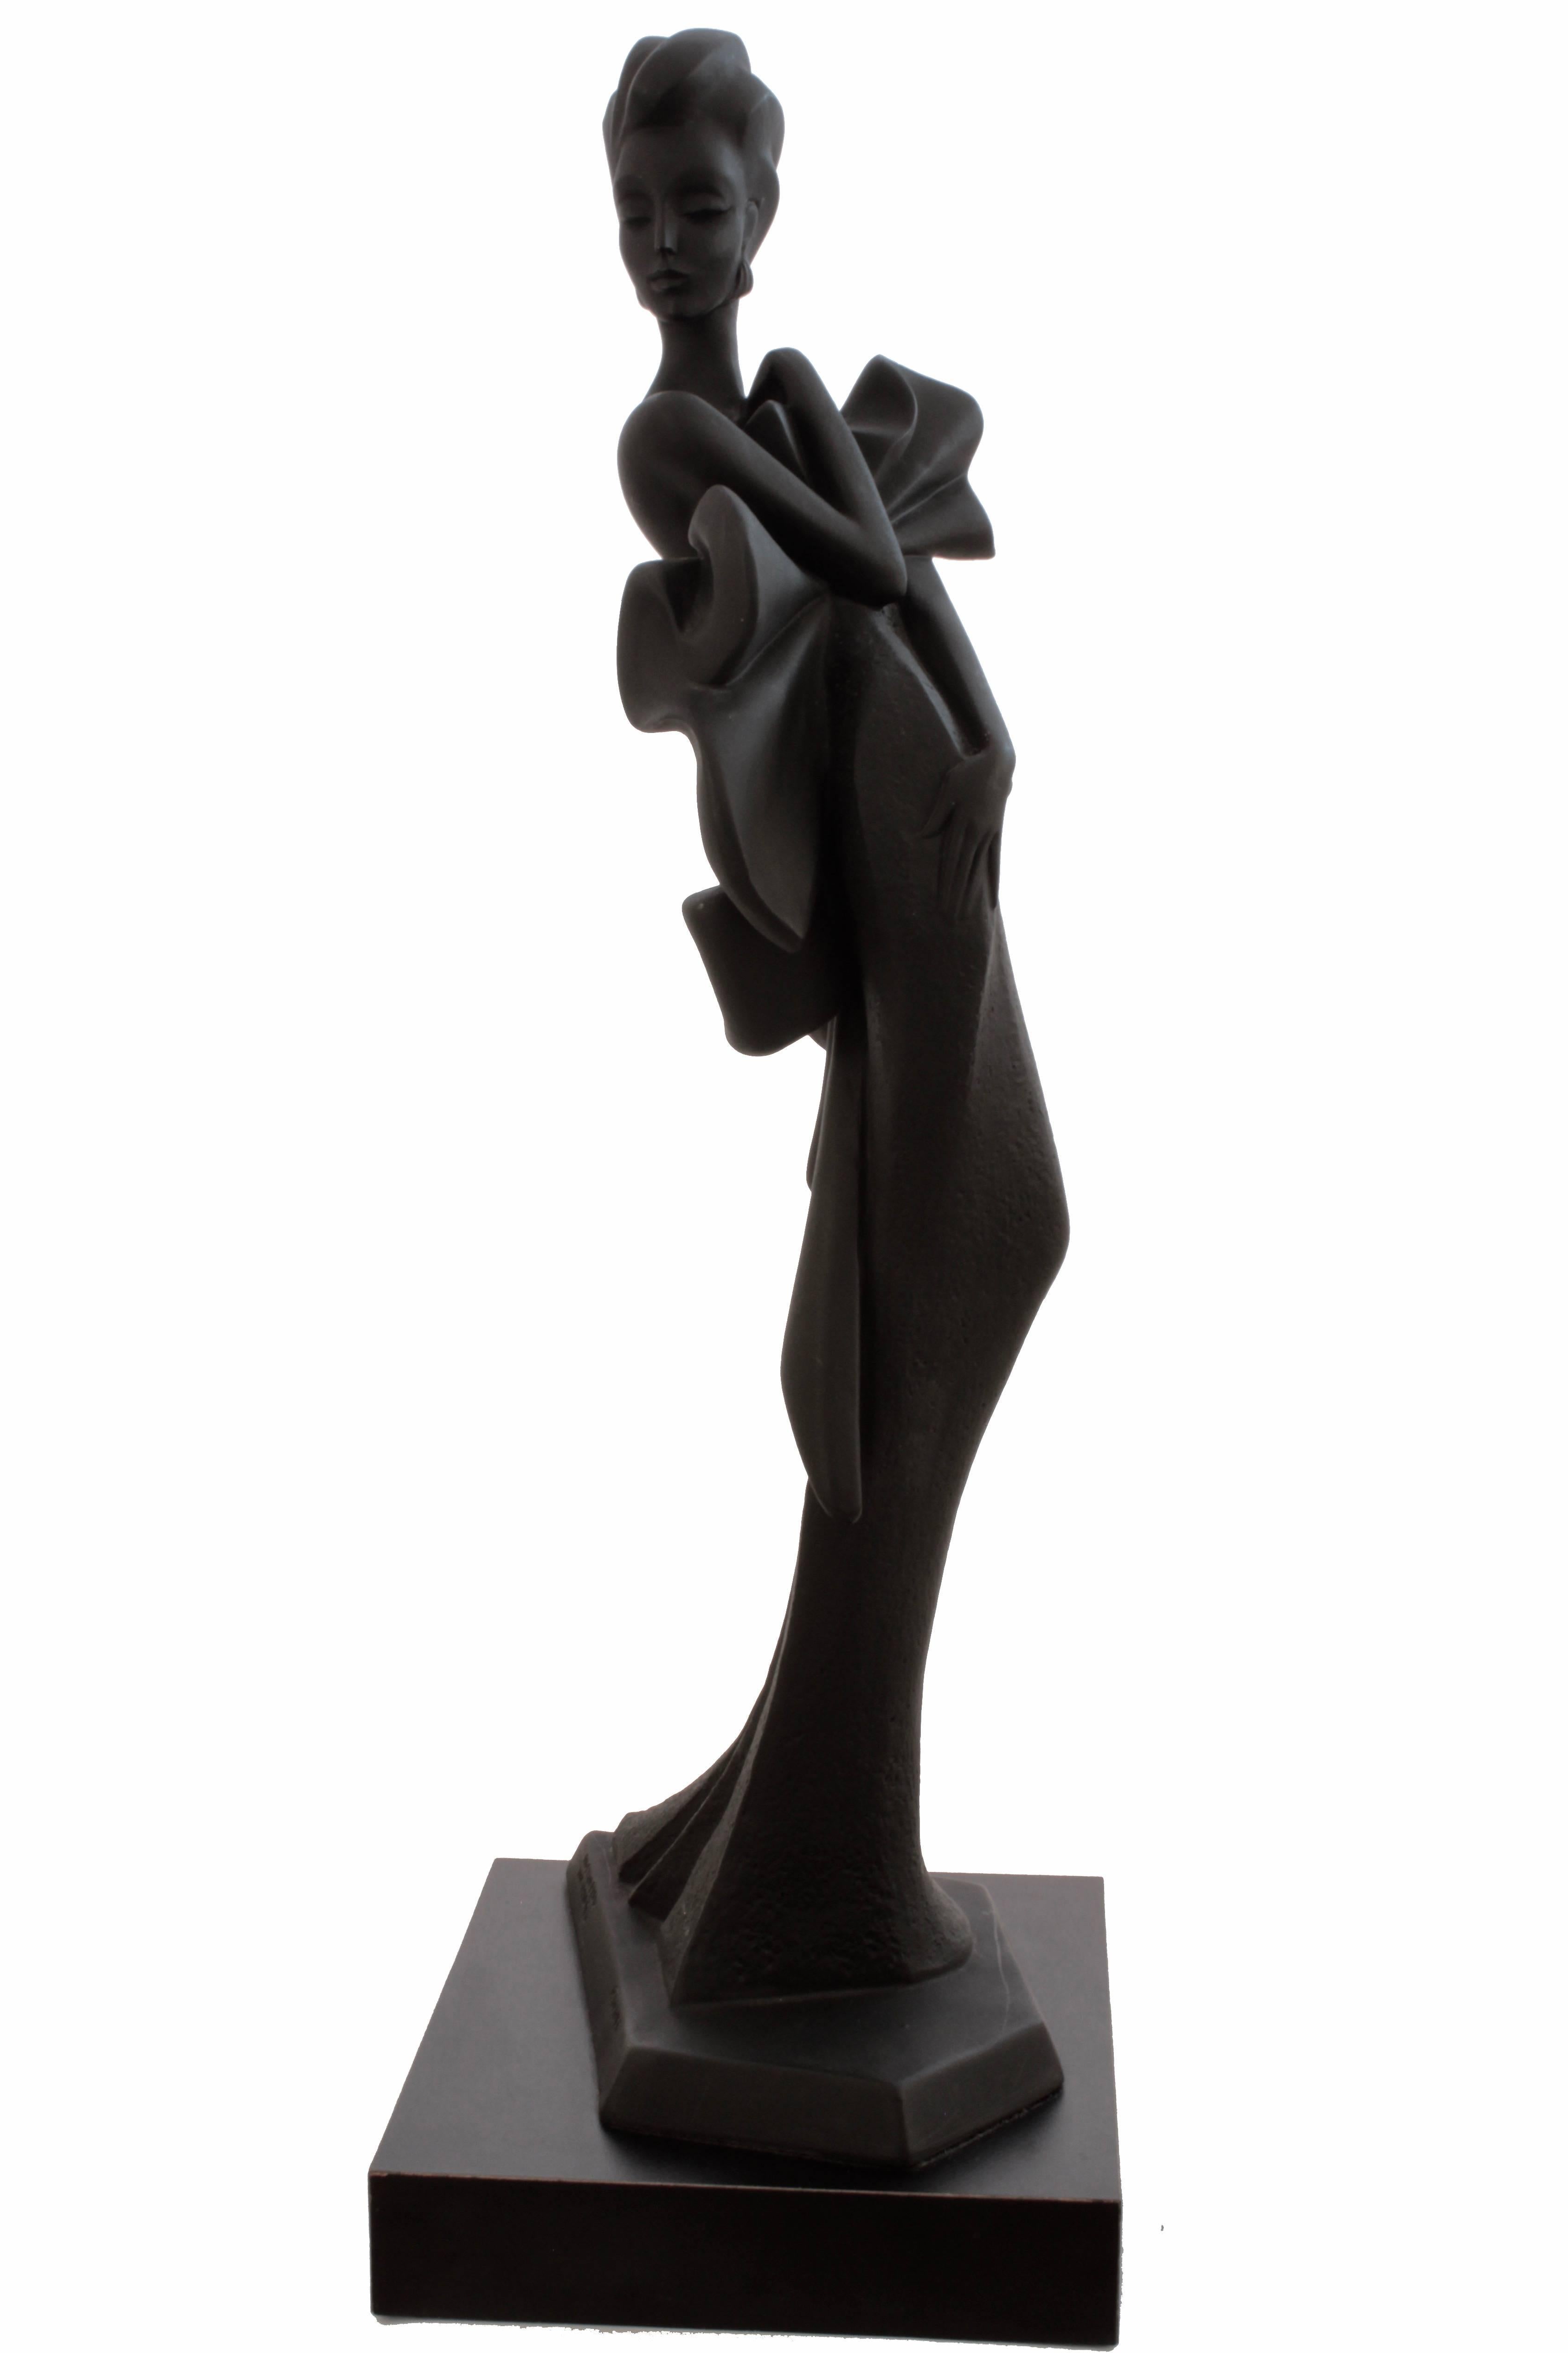 This fabulous 30 inch sculpture of a high fashion woman was produced by Austin Productions and designed by Alexsander Danel in 1990.  From our research, this piece is called ORCHIDE, likely from their high fashion collection. 

The piece stands appx